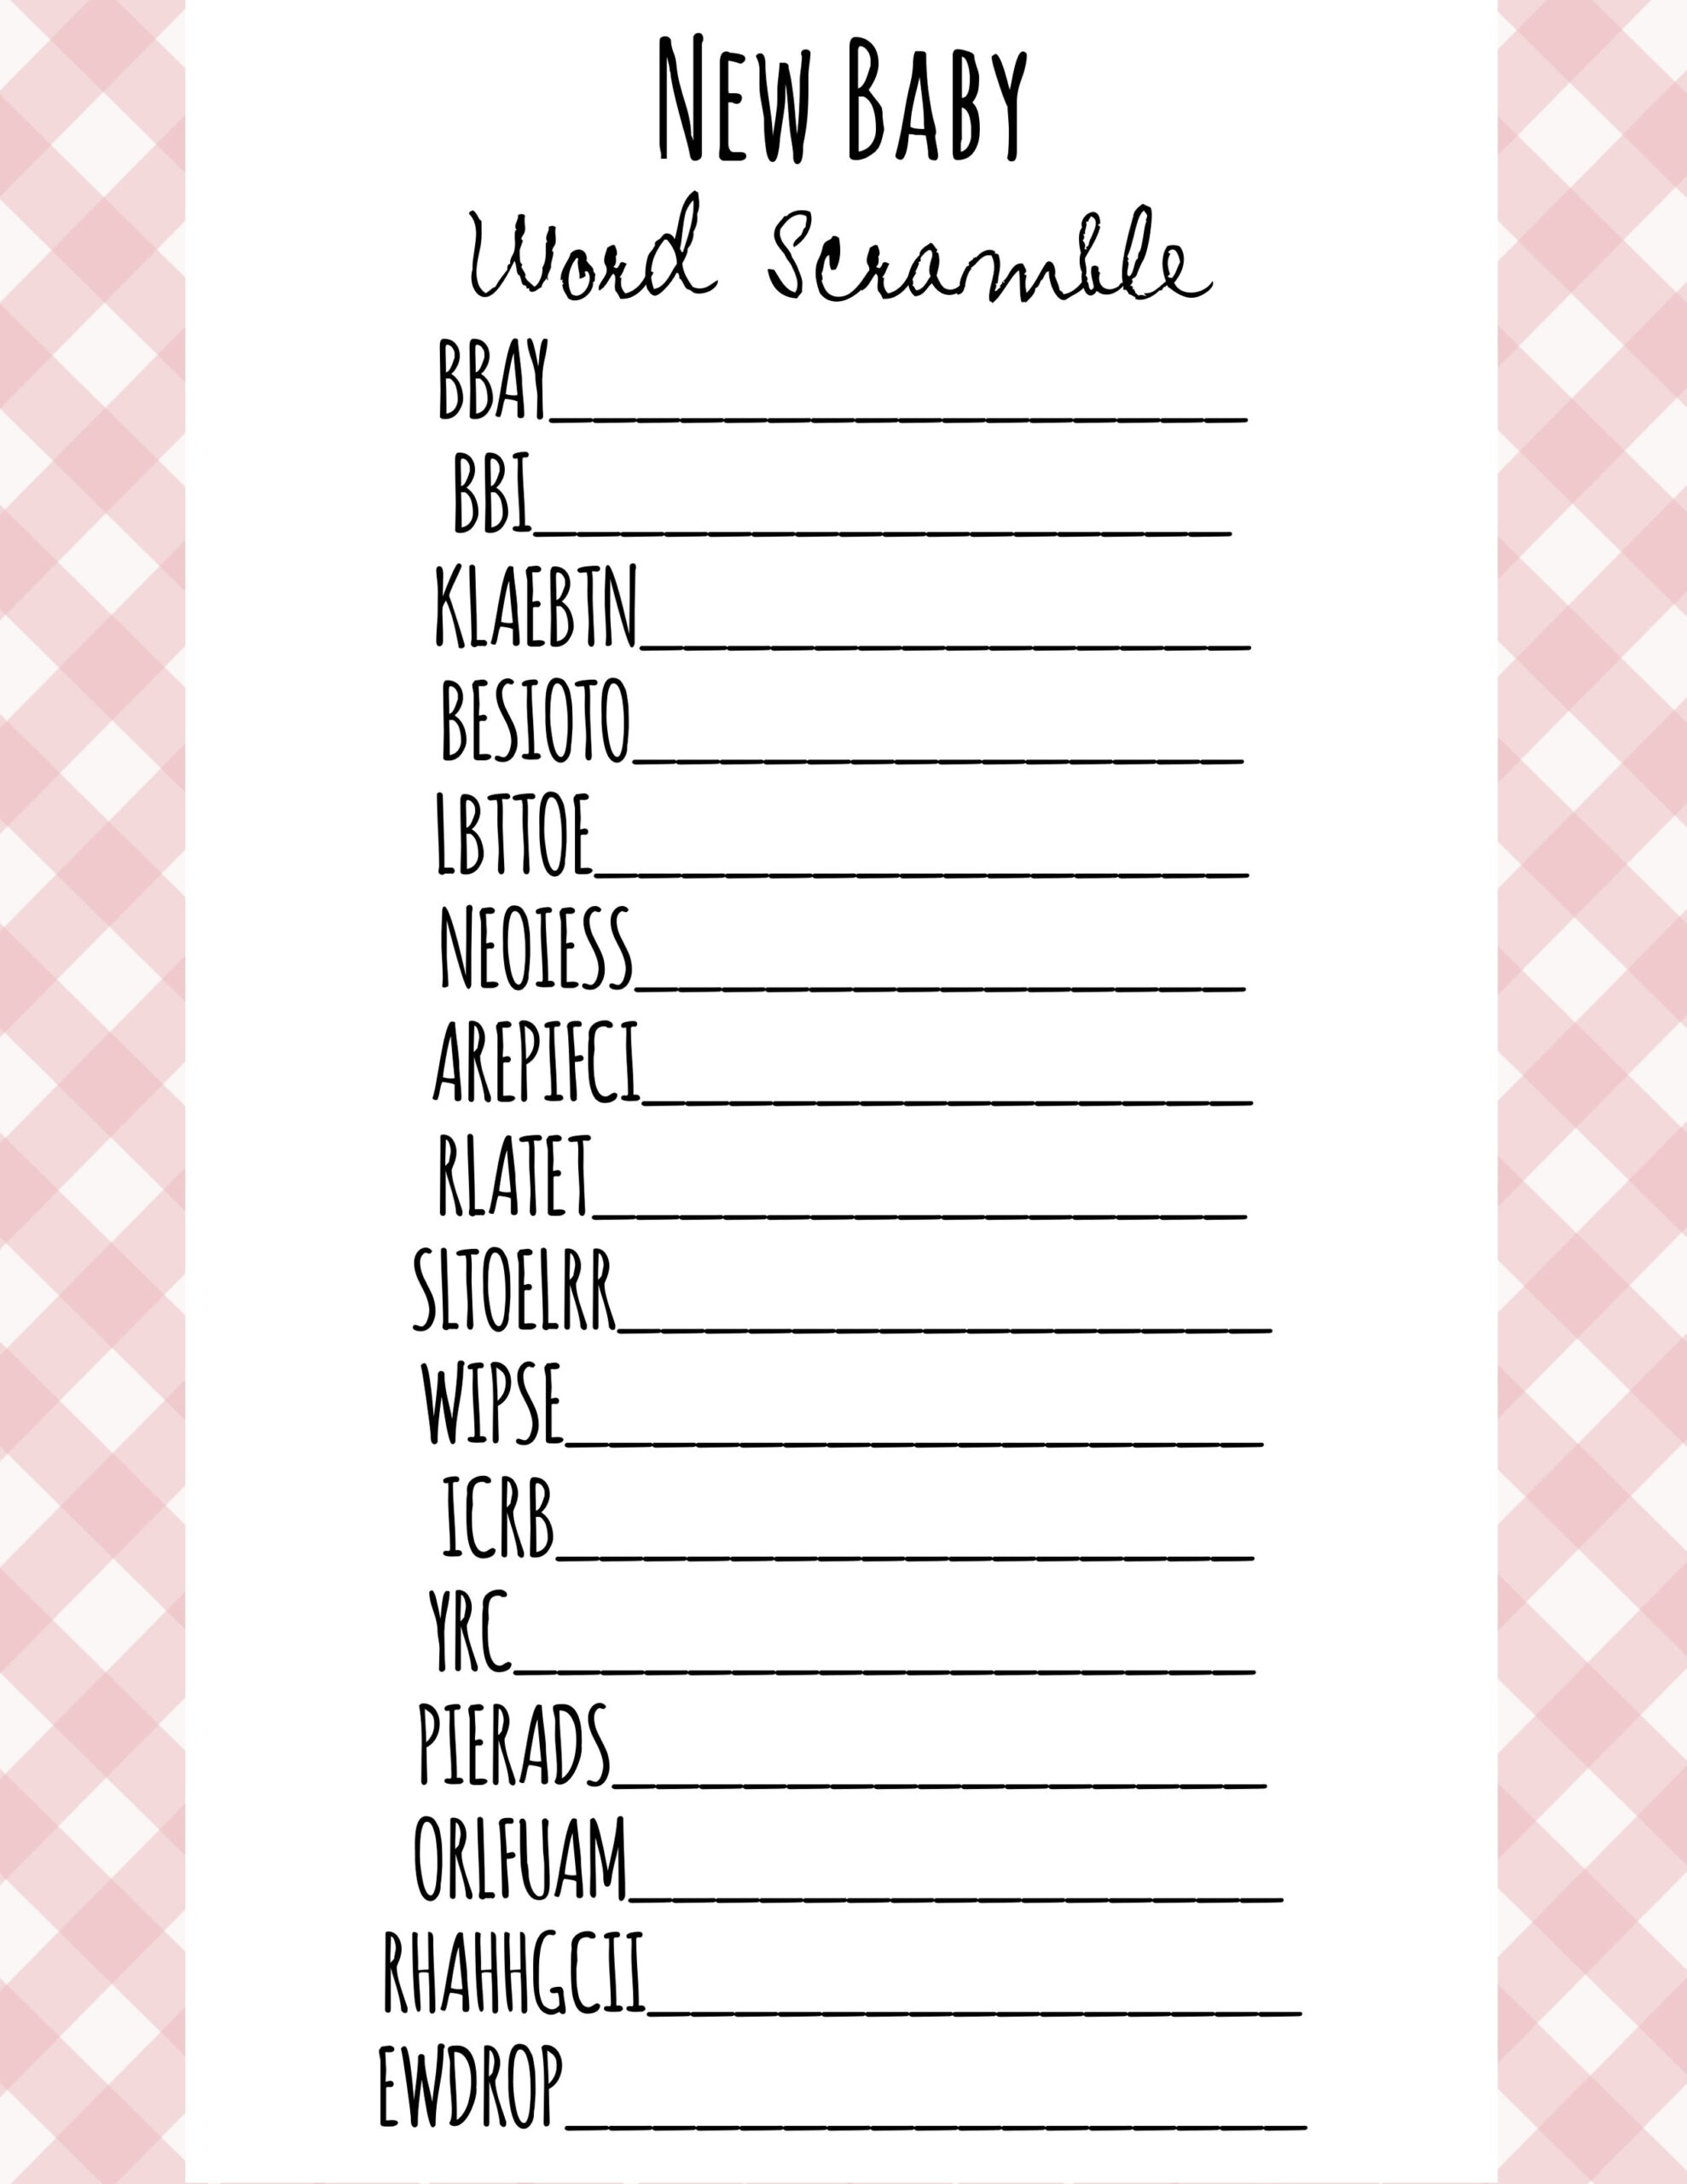 Free Printable Baby Shower Games - Download Instantly! with Free Baby Shower Printables